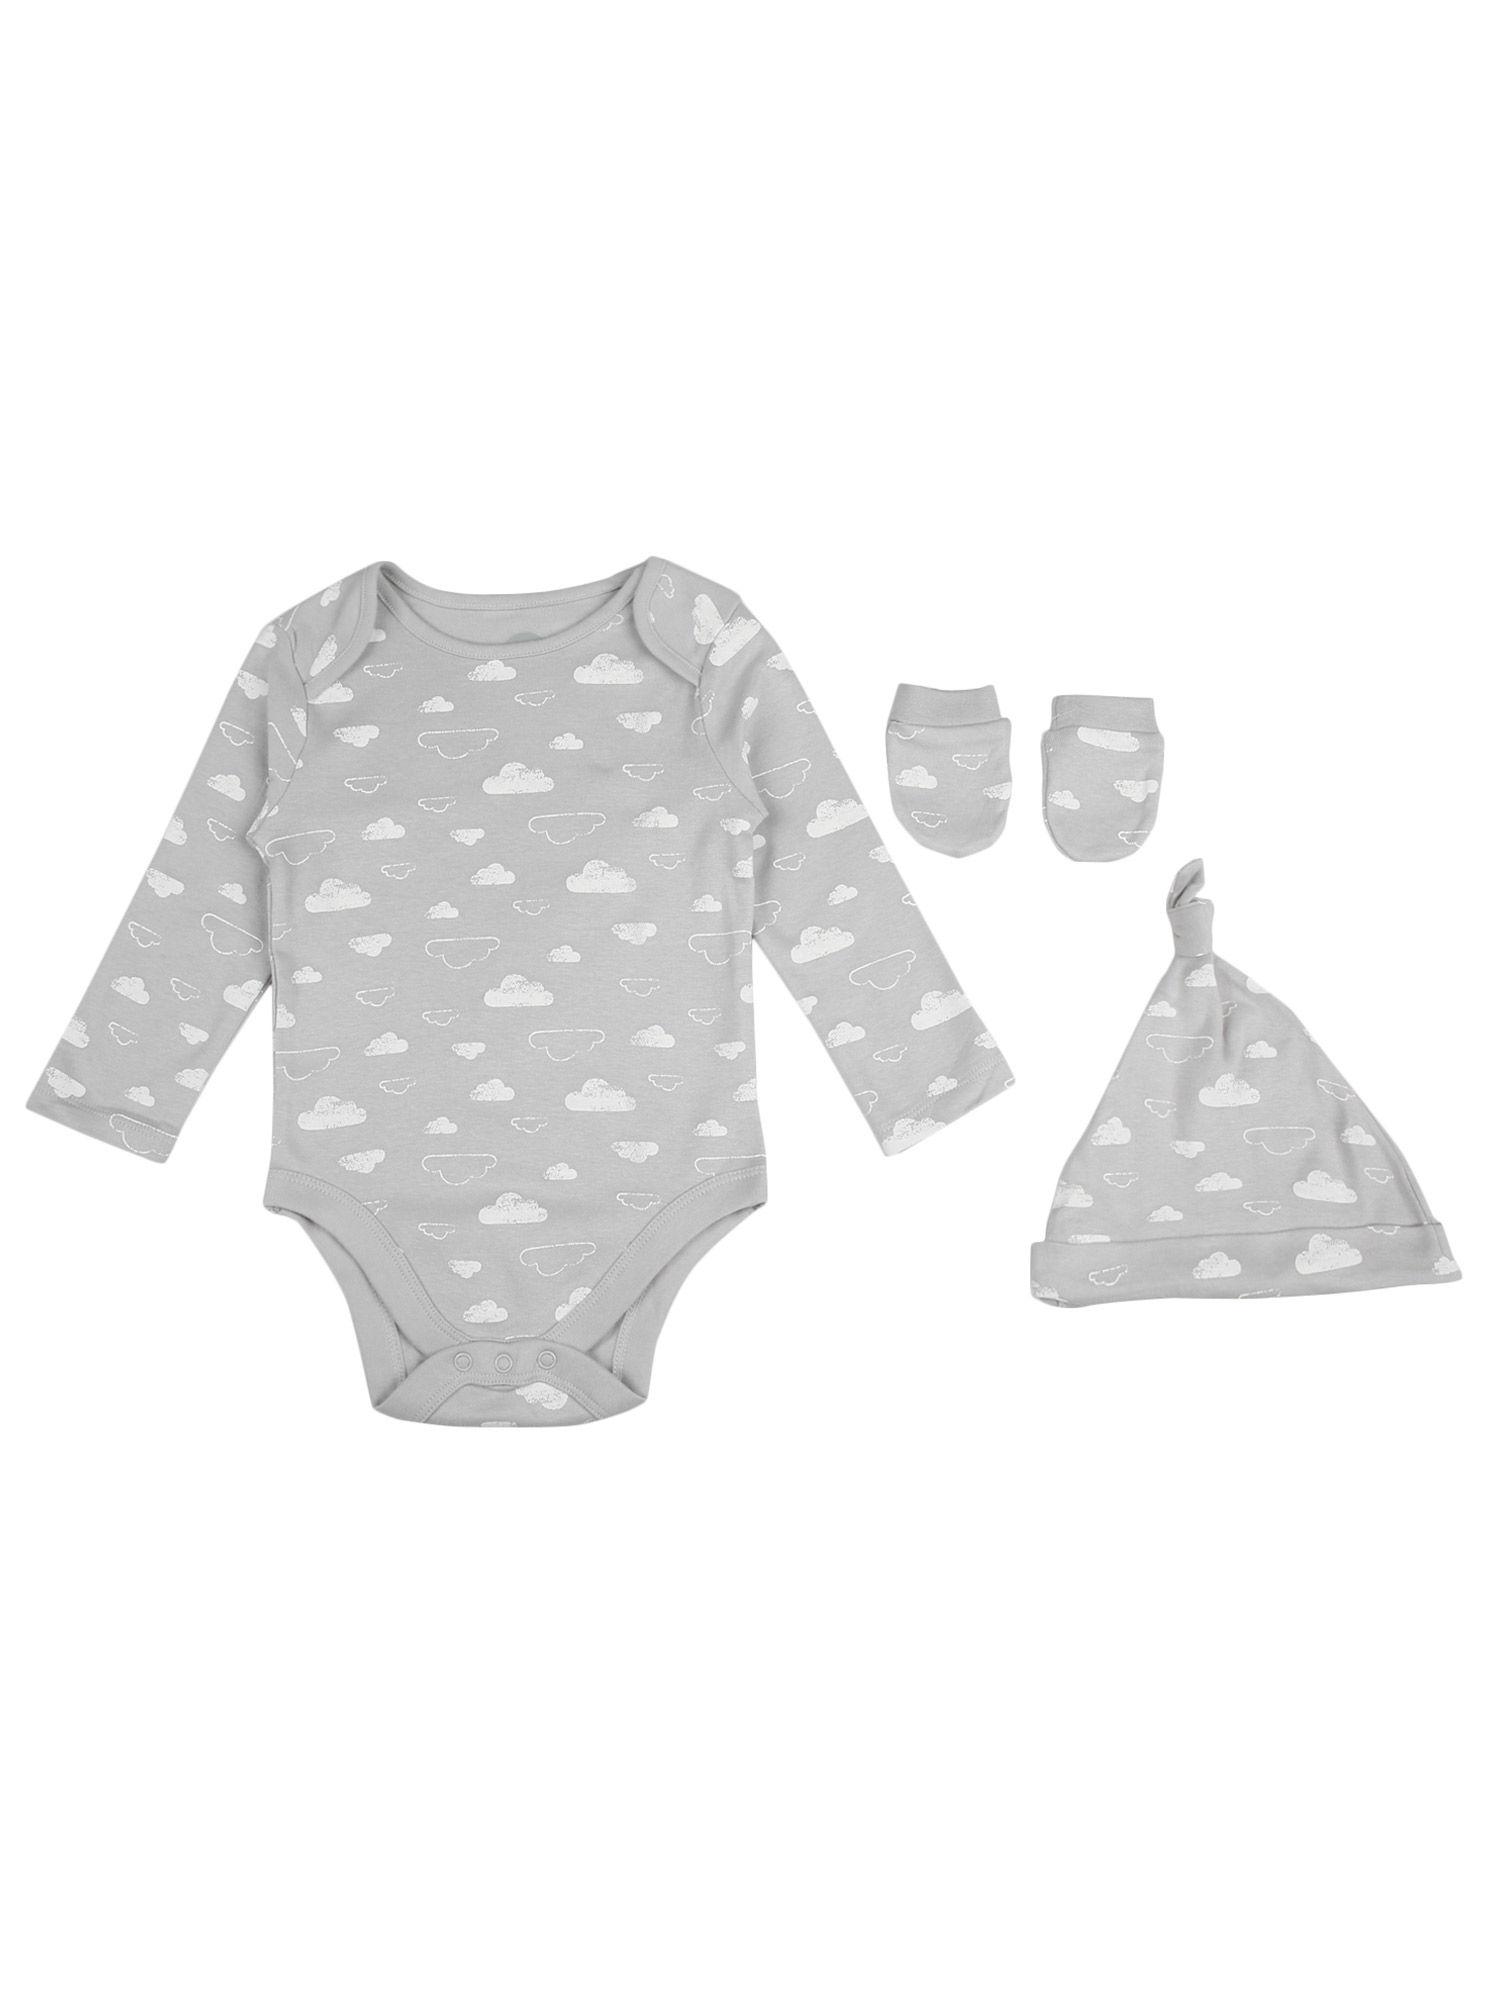 mother care cloud print set for babies bodysuit and socks with cap (set of 3)